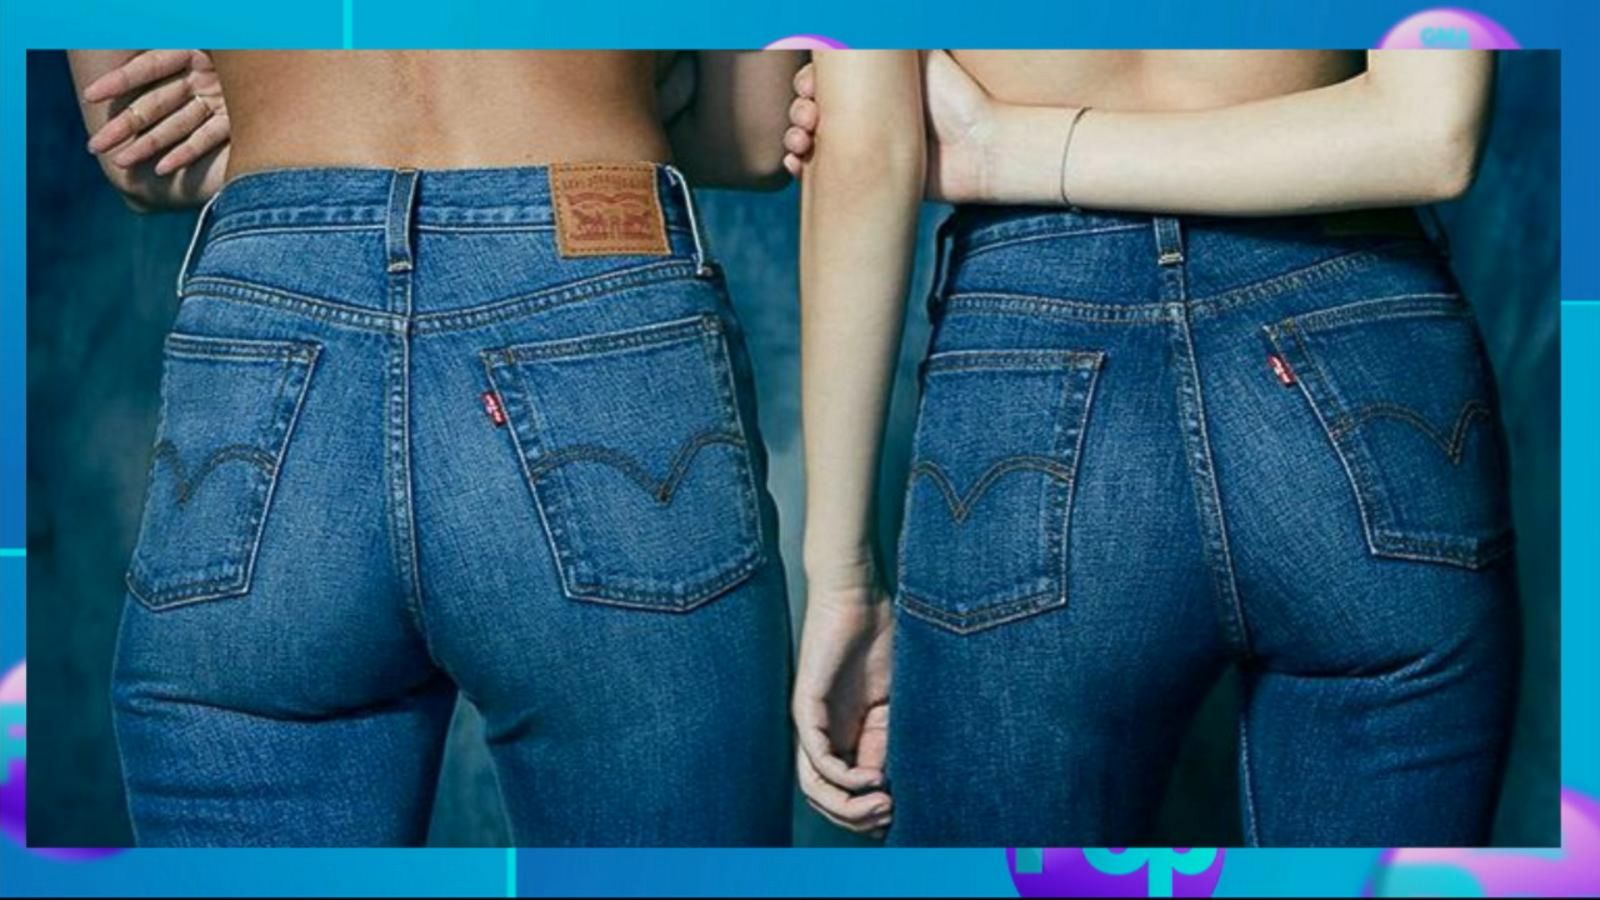 Why Women Are Raving About Levi's New Wedgie Fit Jeans - ABC News